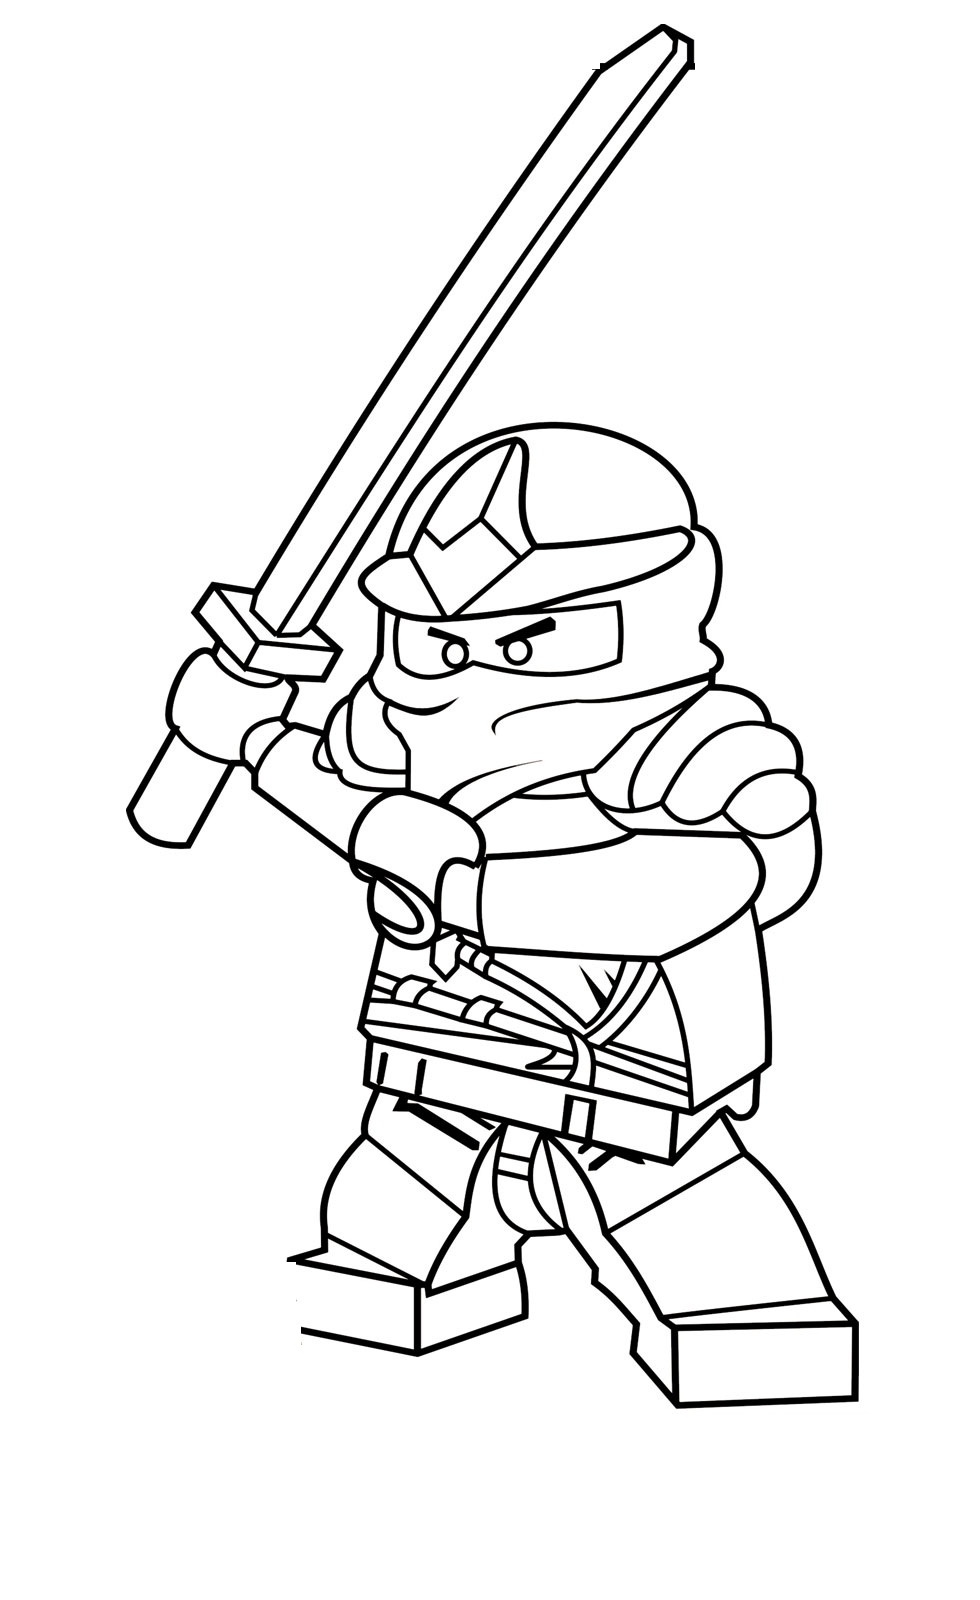  Ninjago Coloring Pages For Kids 3